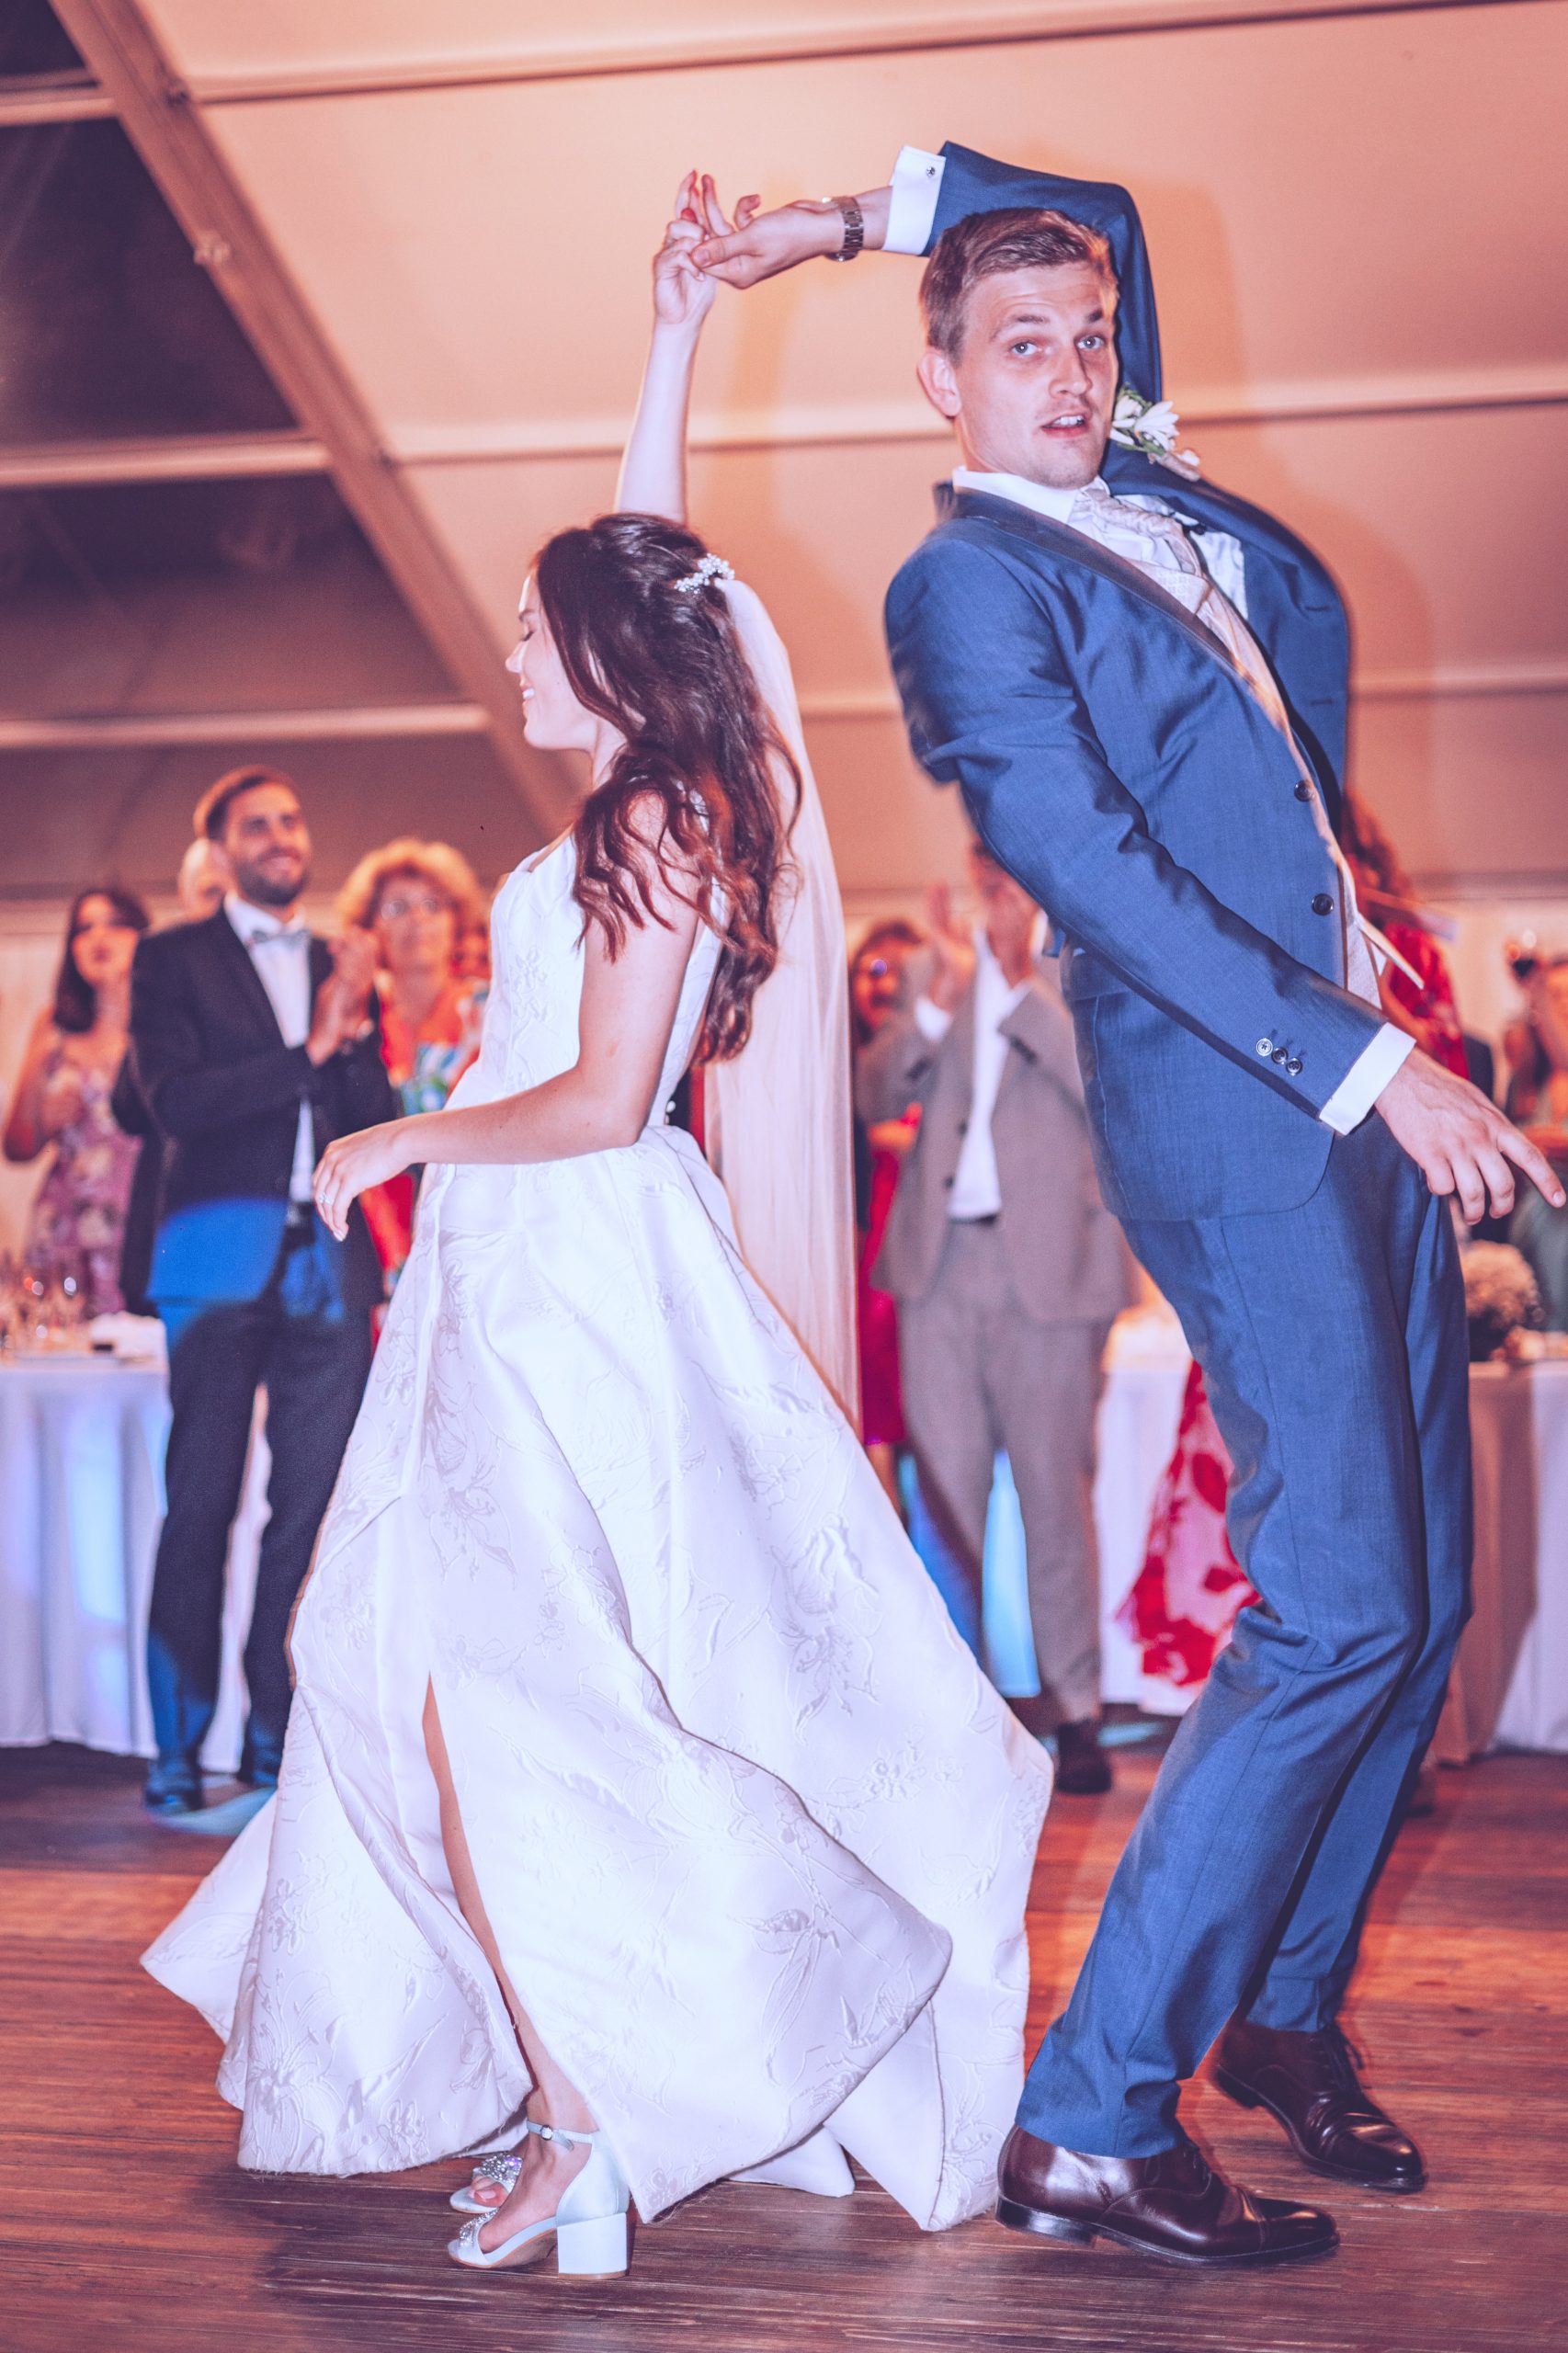 A beautiful reception was held in groom’s family’s backyard in Besson, France. Frances and Théo chose “Ain’t No Mountain High Enough” for their first dance because it was fitting for their relationship. 